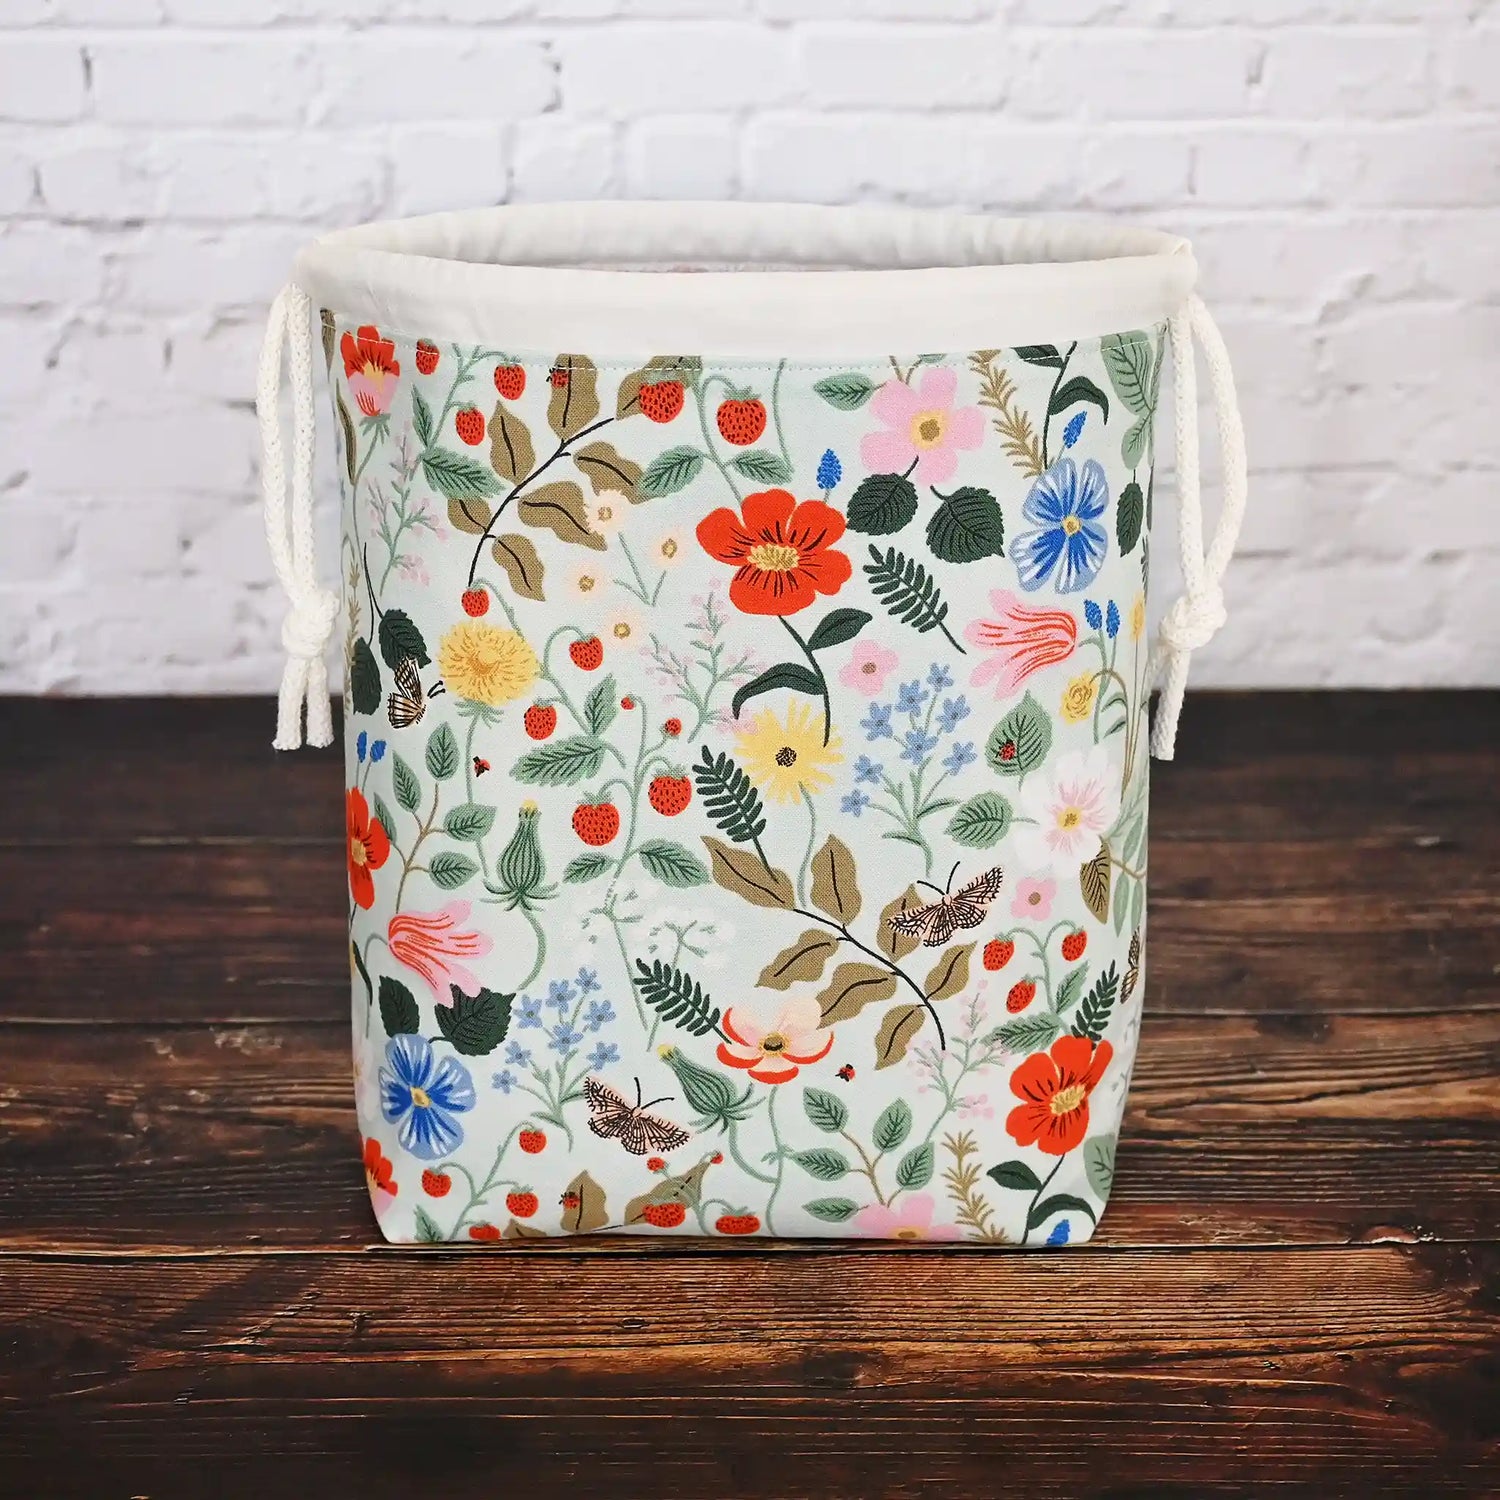 Pretty mint floral drawstring project bag made from Rifle Paper Co's Strawberry Fields Collection.  Lined in a delicate pink floral.  Made in Nova Scotia, Canada by Yellow Petal Handmade.